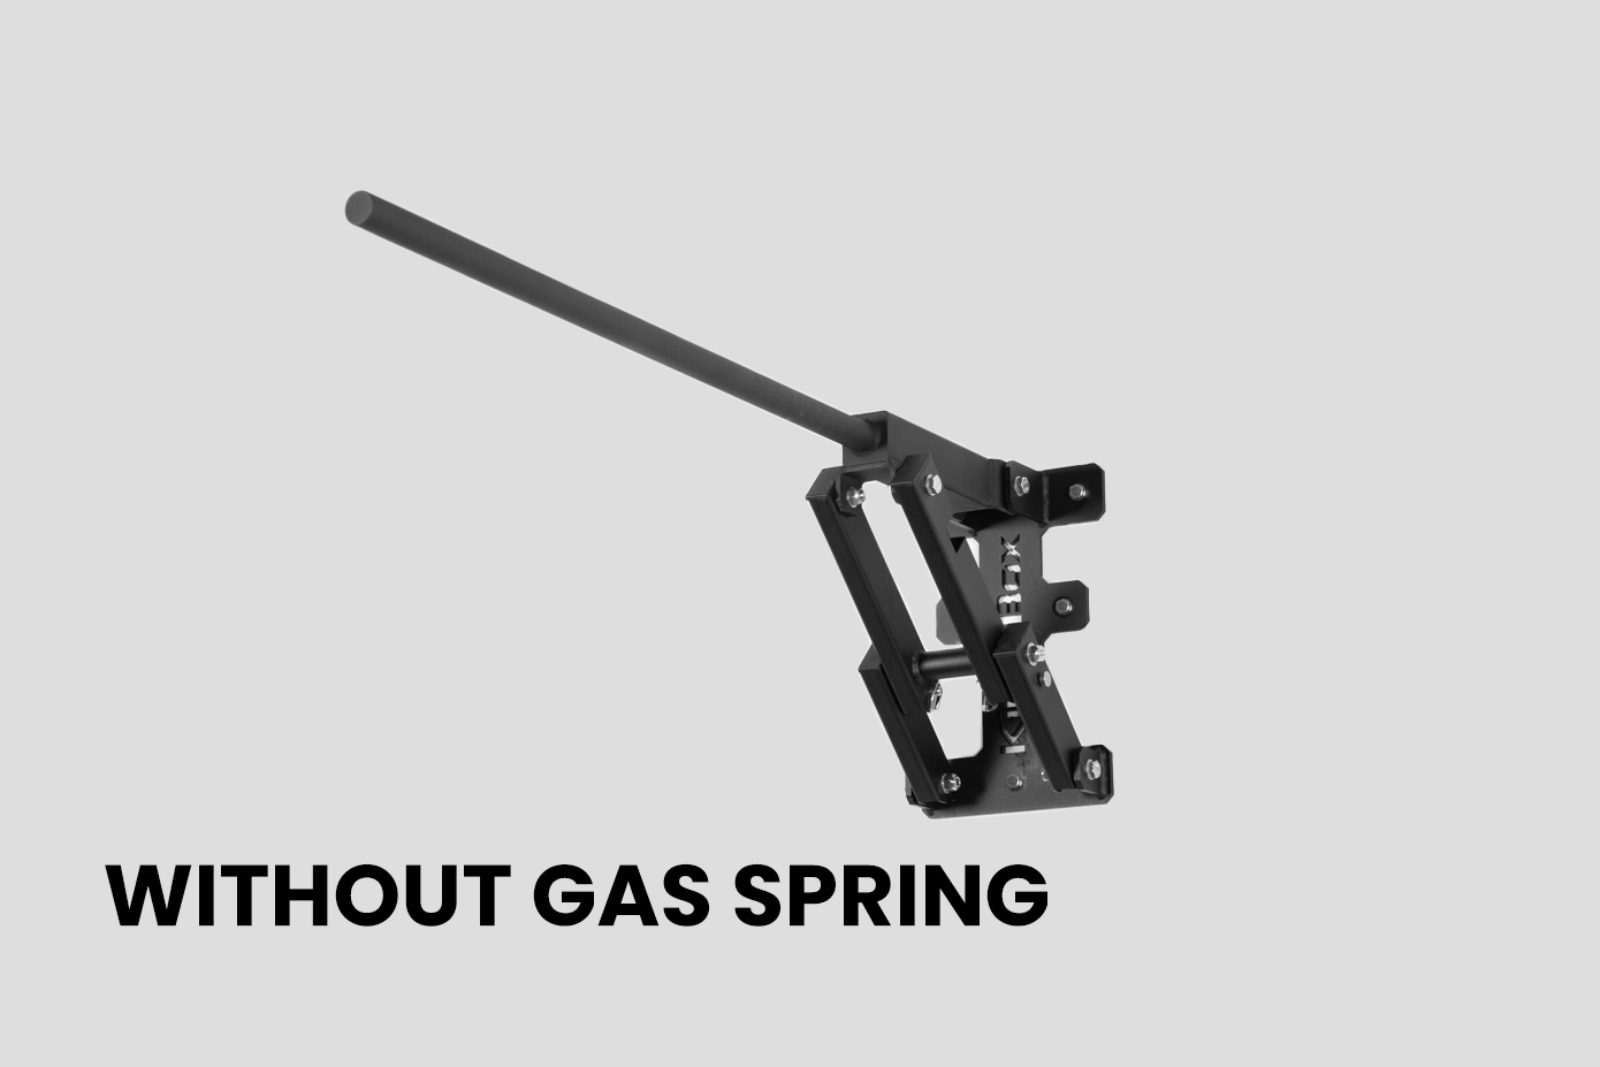 KingsBox Outdoor 3 Seconds Pull Up Bar - without gas spring | KingsBox